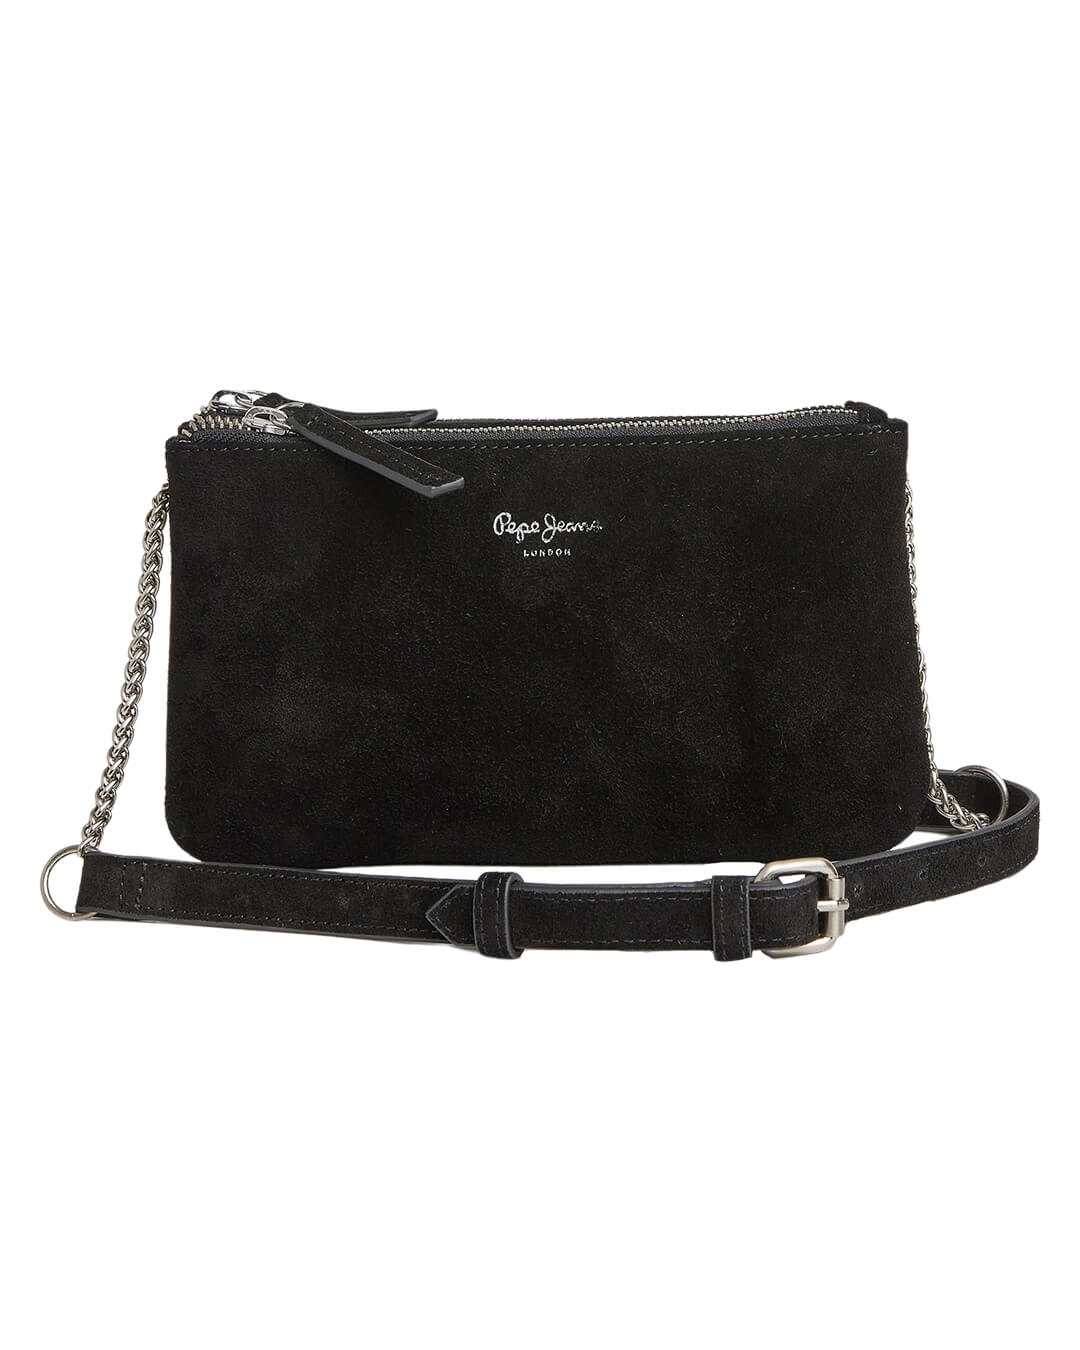 Pepe Jeans Bags ONE Pepe Jeans Astrid Angie Black Bag